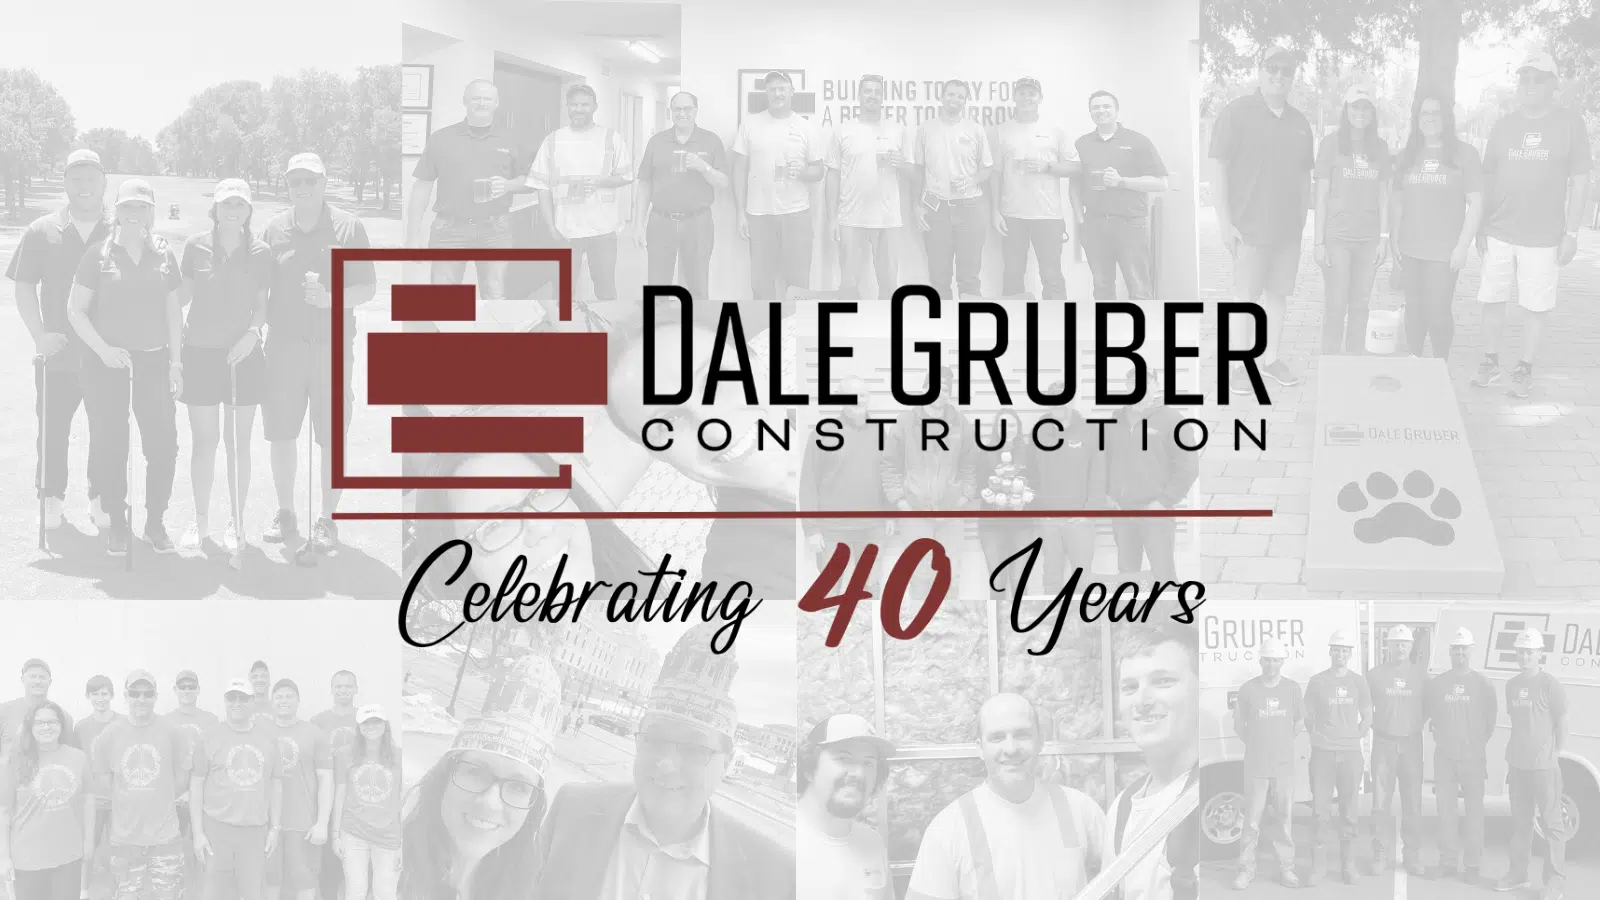 Dale Gruber Construction Celebrates 40 Years!